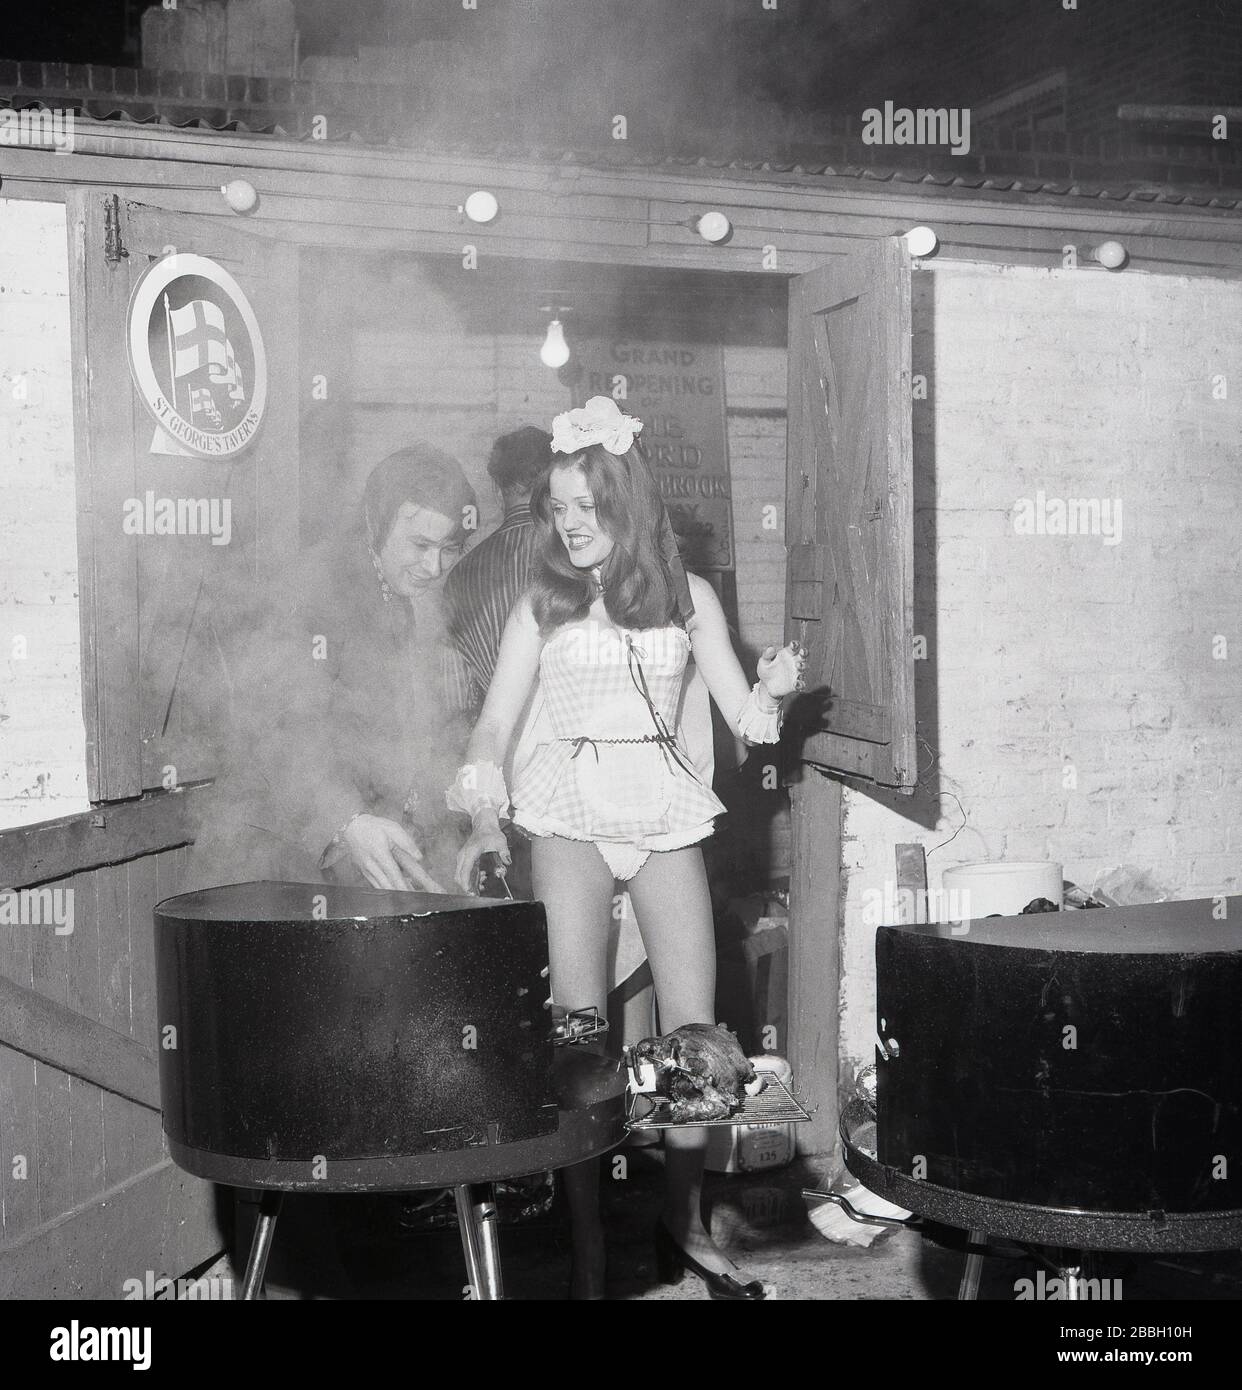 1973, historical, an attractive young lady wearing a very short party frock helping with the cooking outside on a grill at a fund raising barbeque at The Lord Northbrook pub, Lee, South East London, England. At the corner of southbrook Rd, the pub is named after Lord Northbrook, whose family, Baring, the banking family in the 19th century had an estate in the borough. Stock Photo